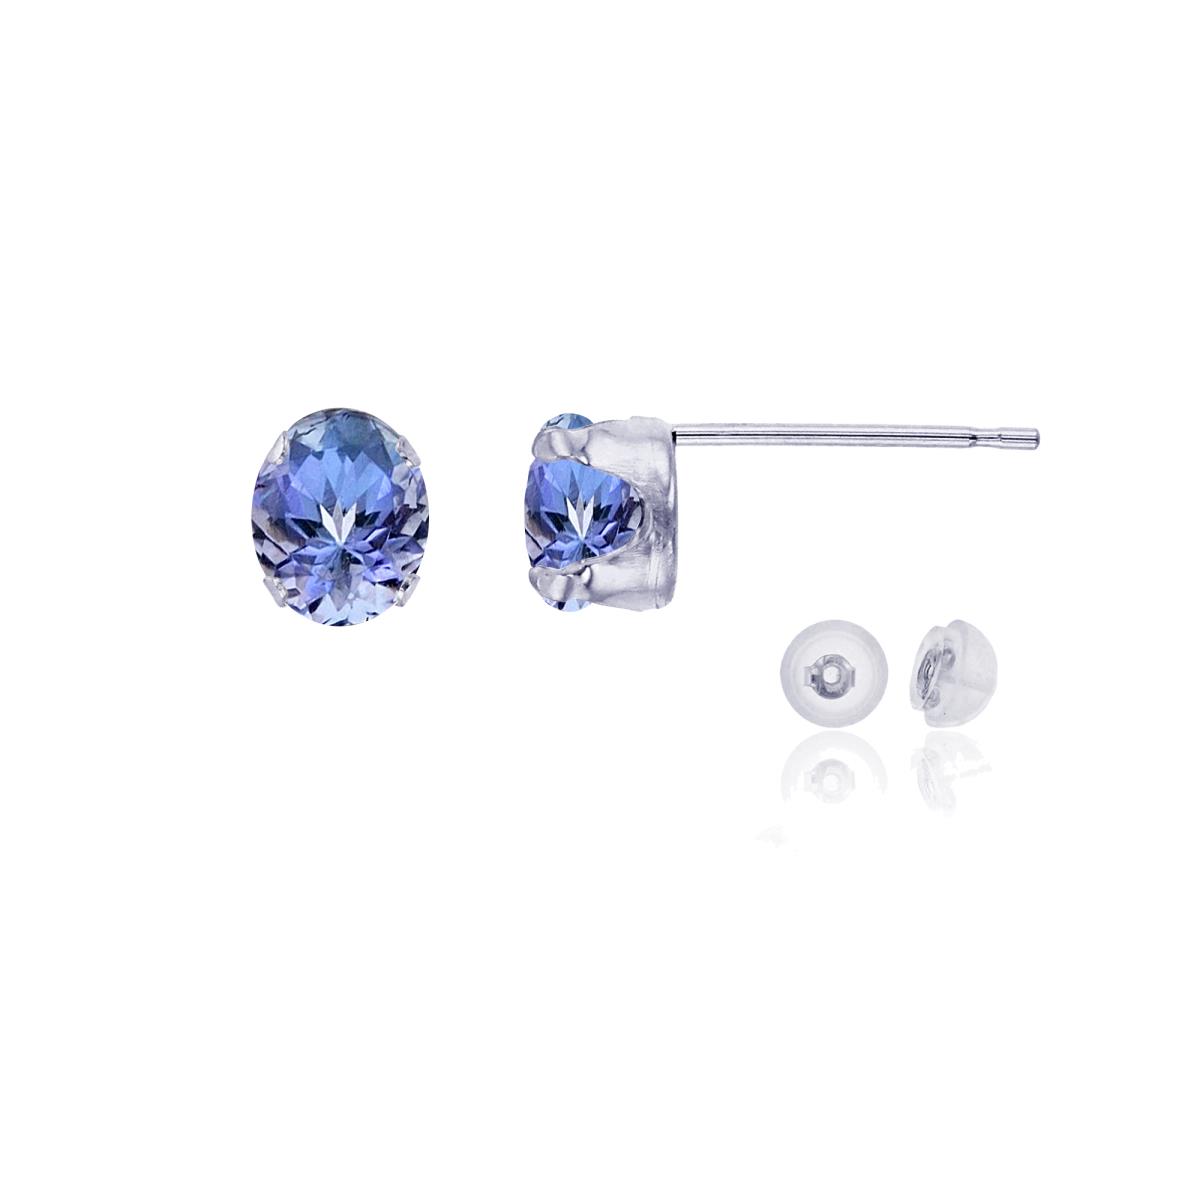 10K White Gold 6x4mm Oval Tanzanite Stud Earring with Silicone Back